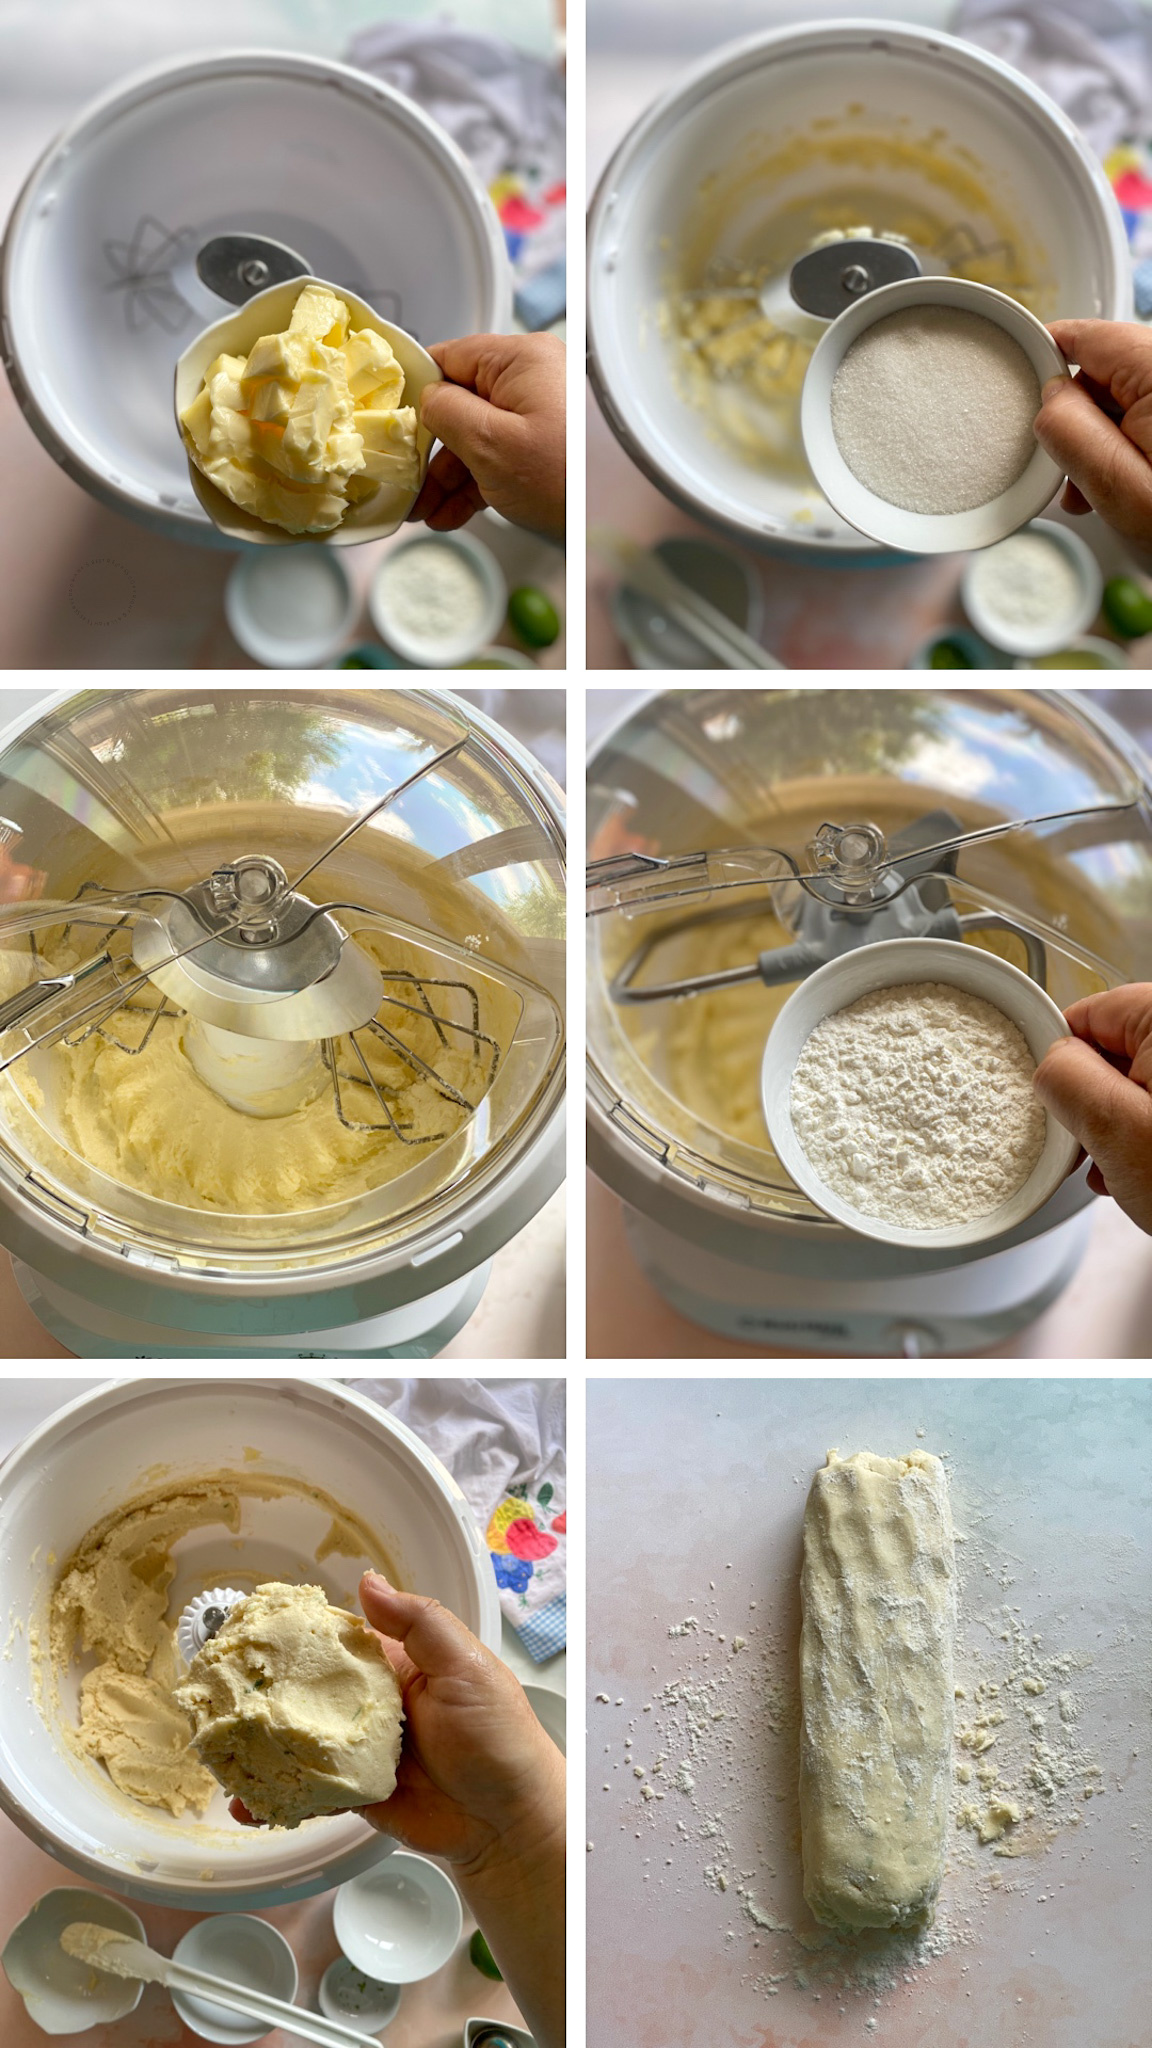 Step by step on how to make dough for sequilhos